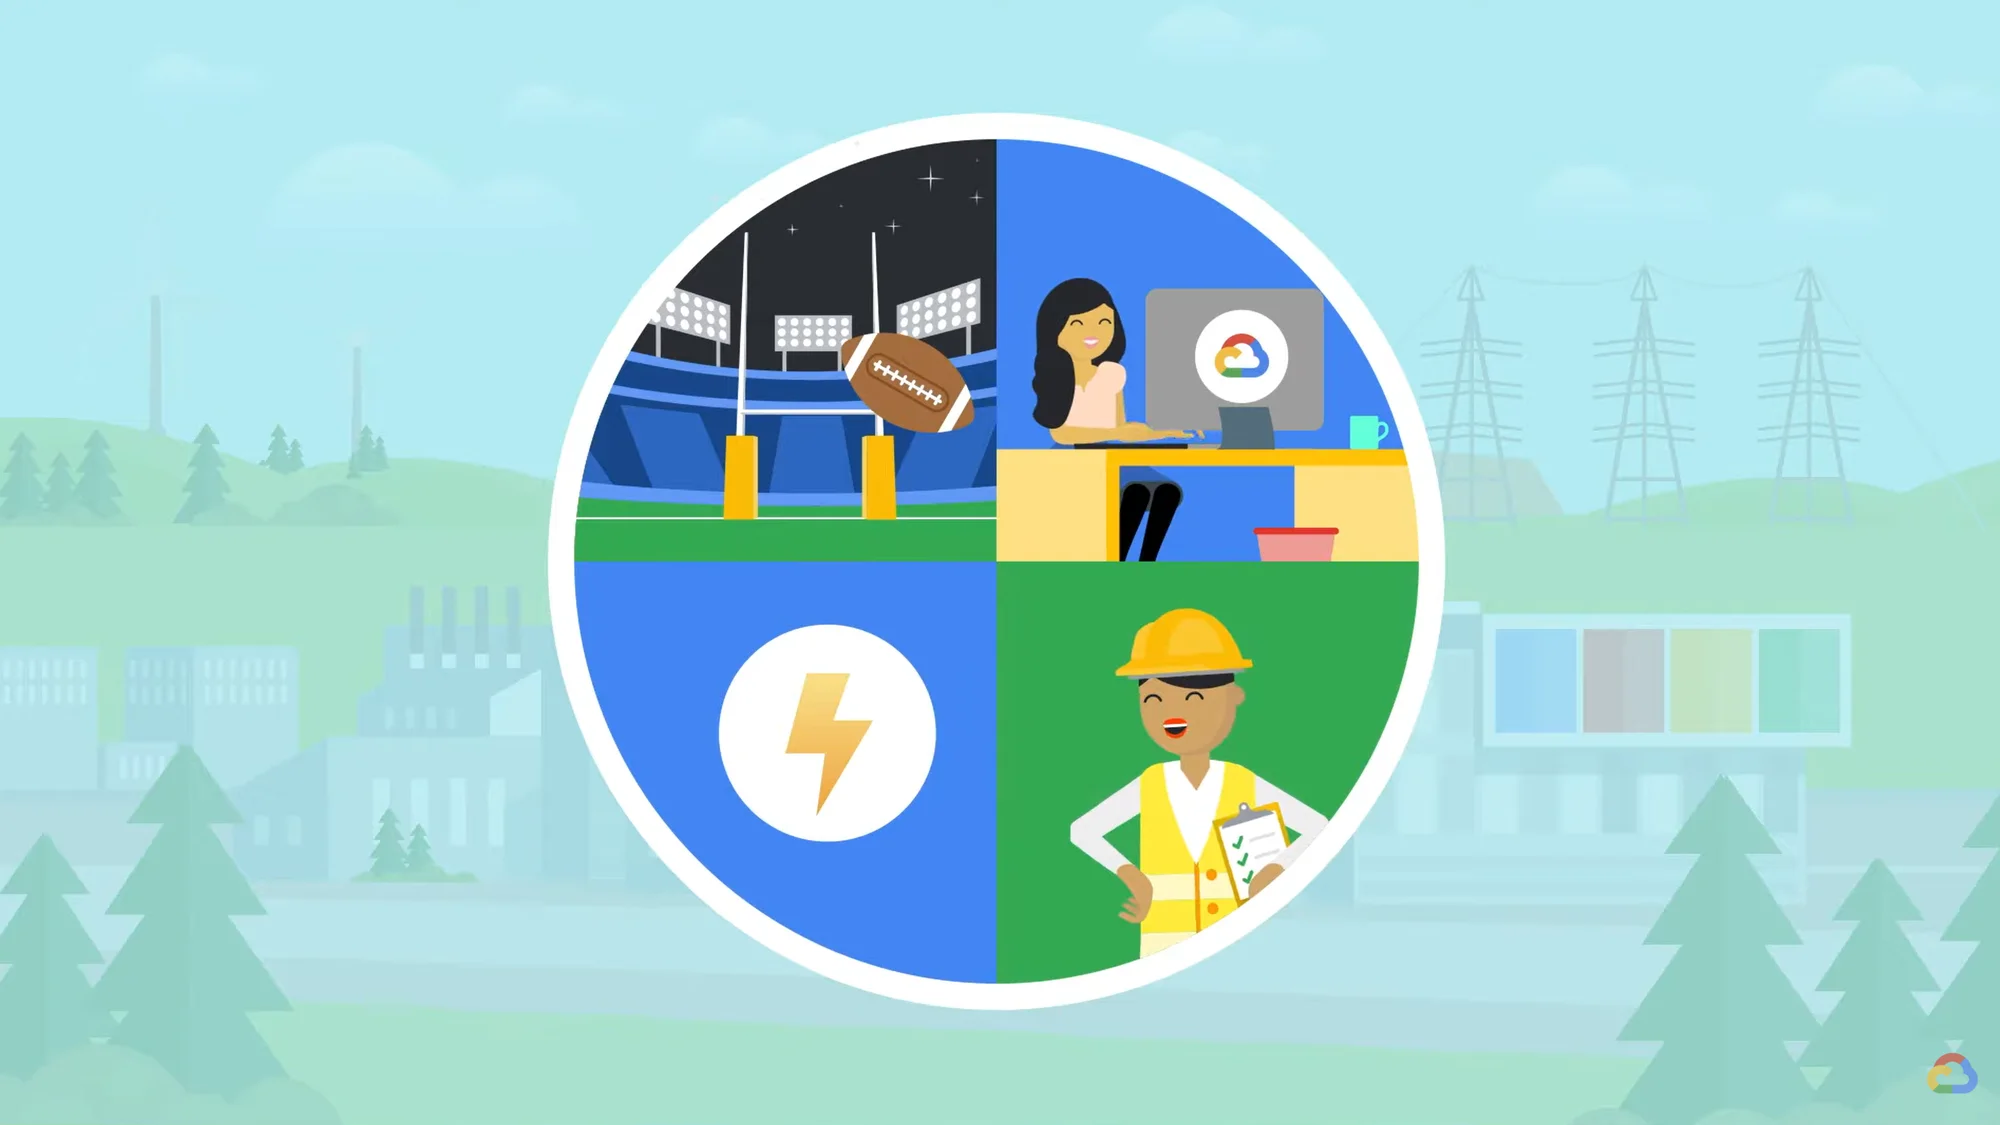 Animated image of a circle with four quadrants to represent the factors that are necessary when choosing a data center location. The four quadrants include a lightning bolt representing energy infrastructure, a woman sitting at her desk at work representing proximity to users, a worker in a hardhat representing available workforce, and a football field to indicate that a data center campus can be as large as 100 football fields.